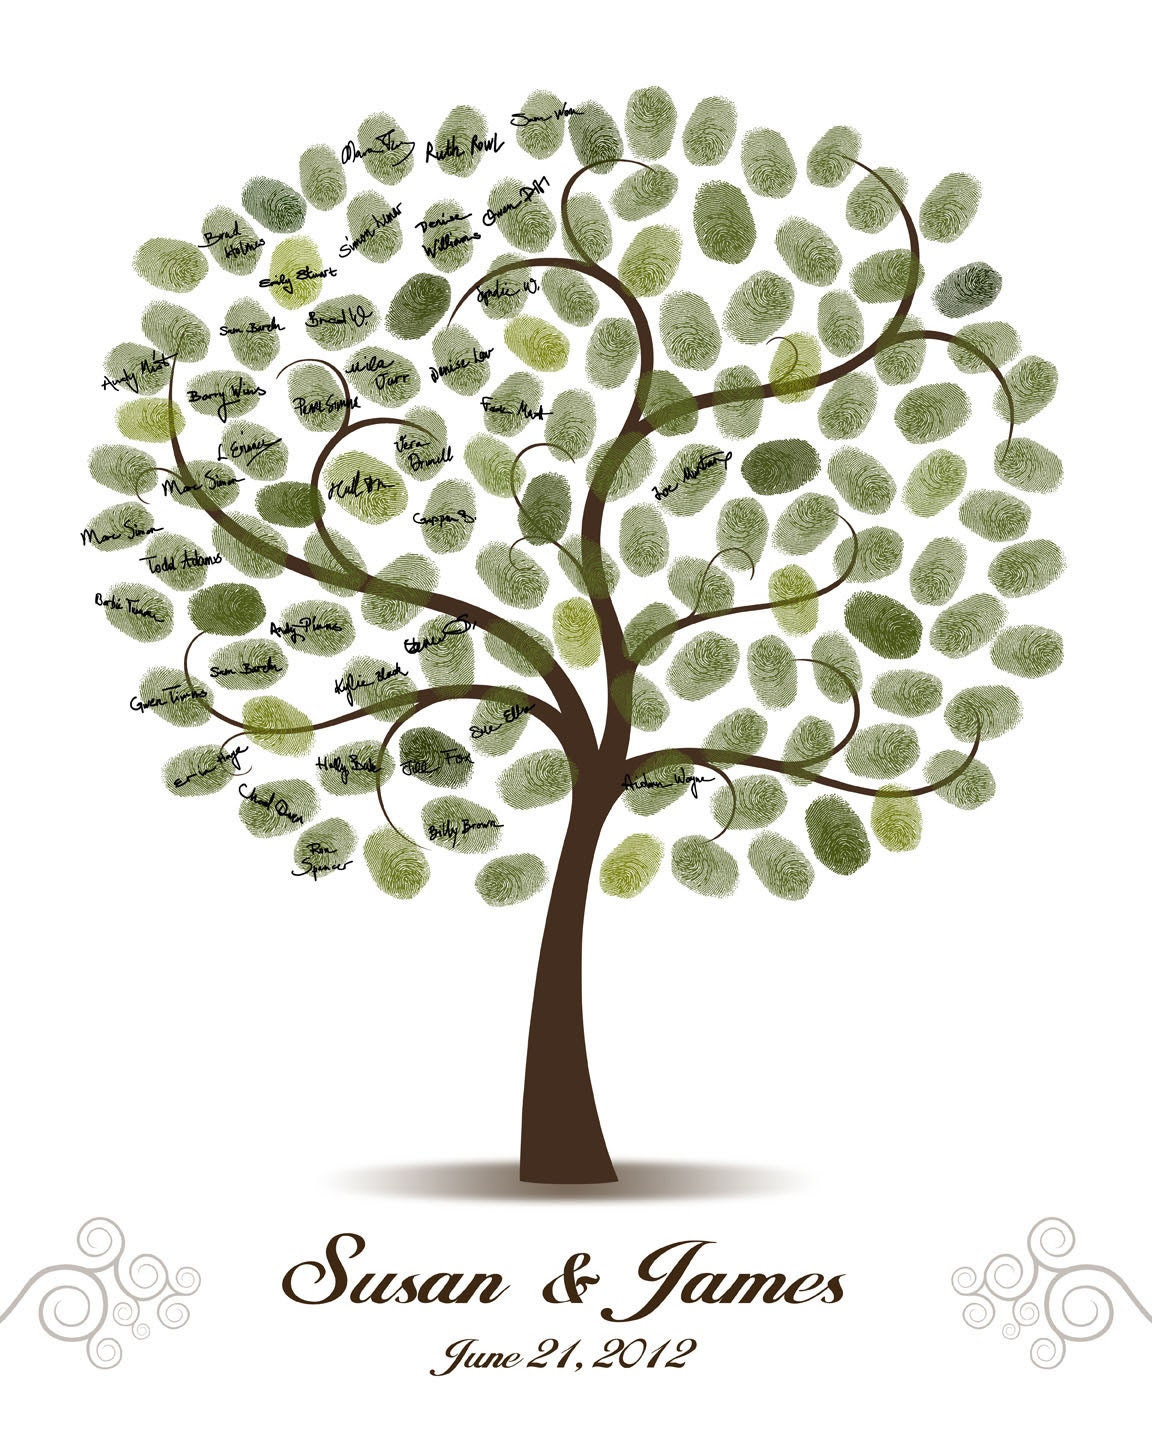 Wedding Tree Guest Book Print 16x20, 17x22, 18x24 or 20x25 inches - Curly Fingerprint and Signature Tree - FAST SHIPPING - CustombyBernolli